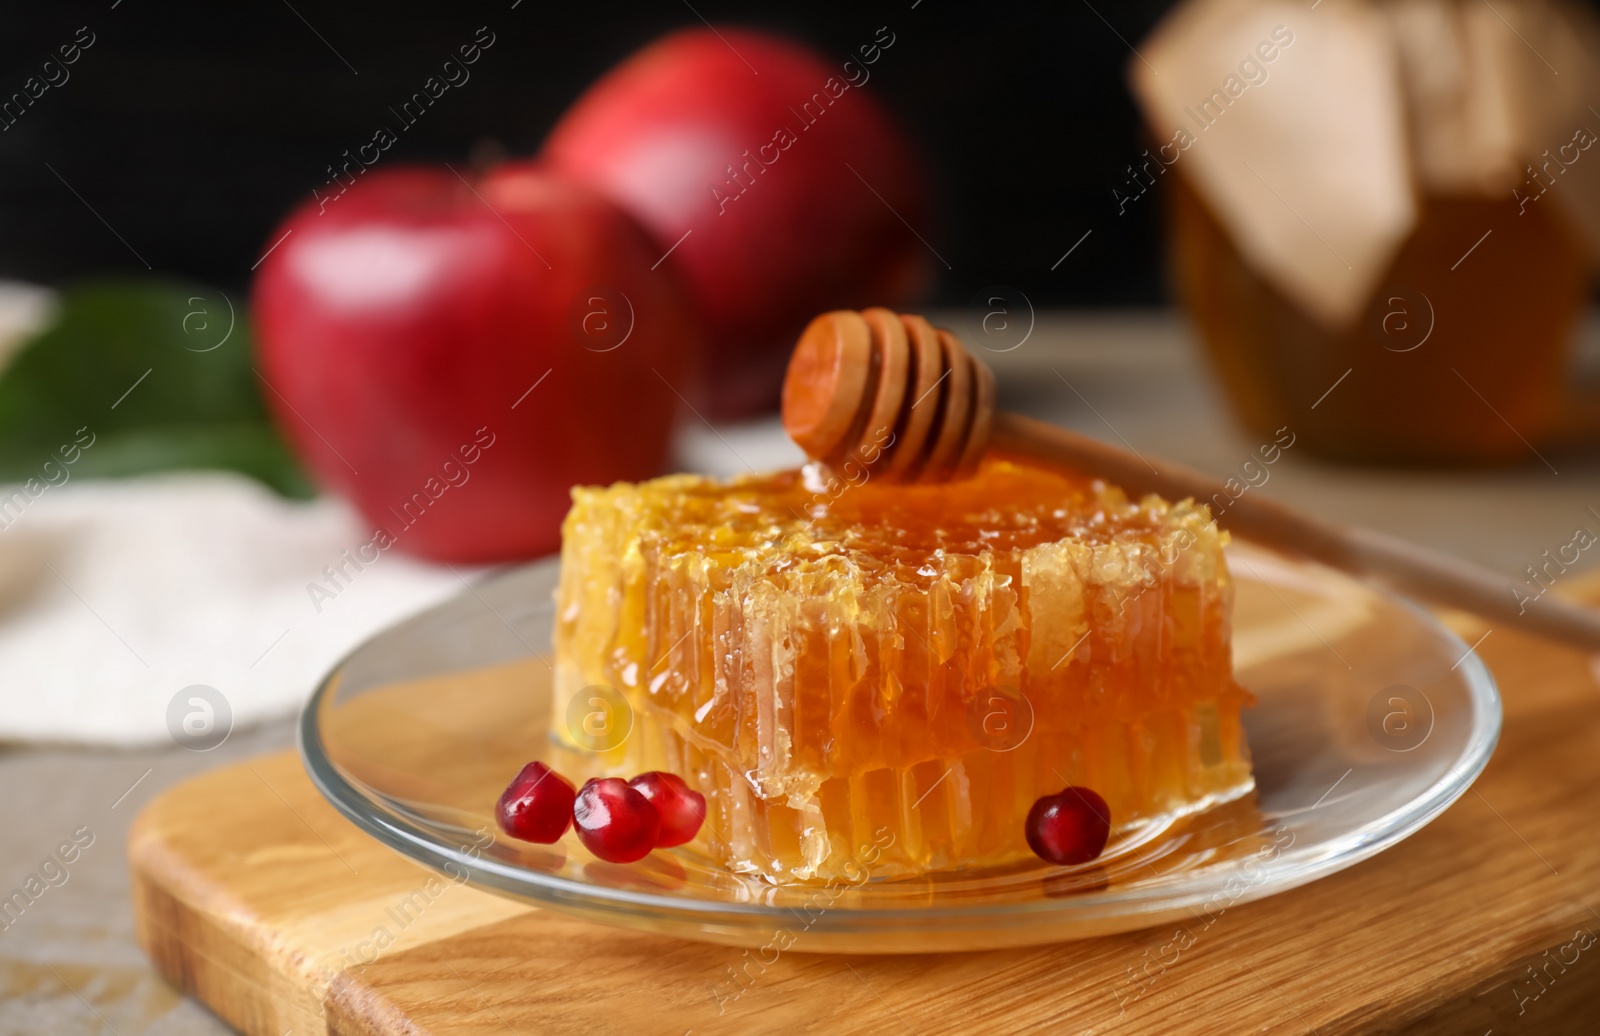 Photo of Honeycomb with pomegranate seeds near apples on wooden table, closeup. Rosh Hashanah holiday